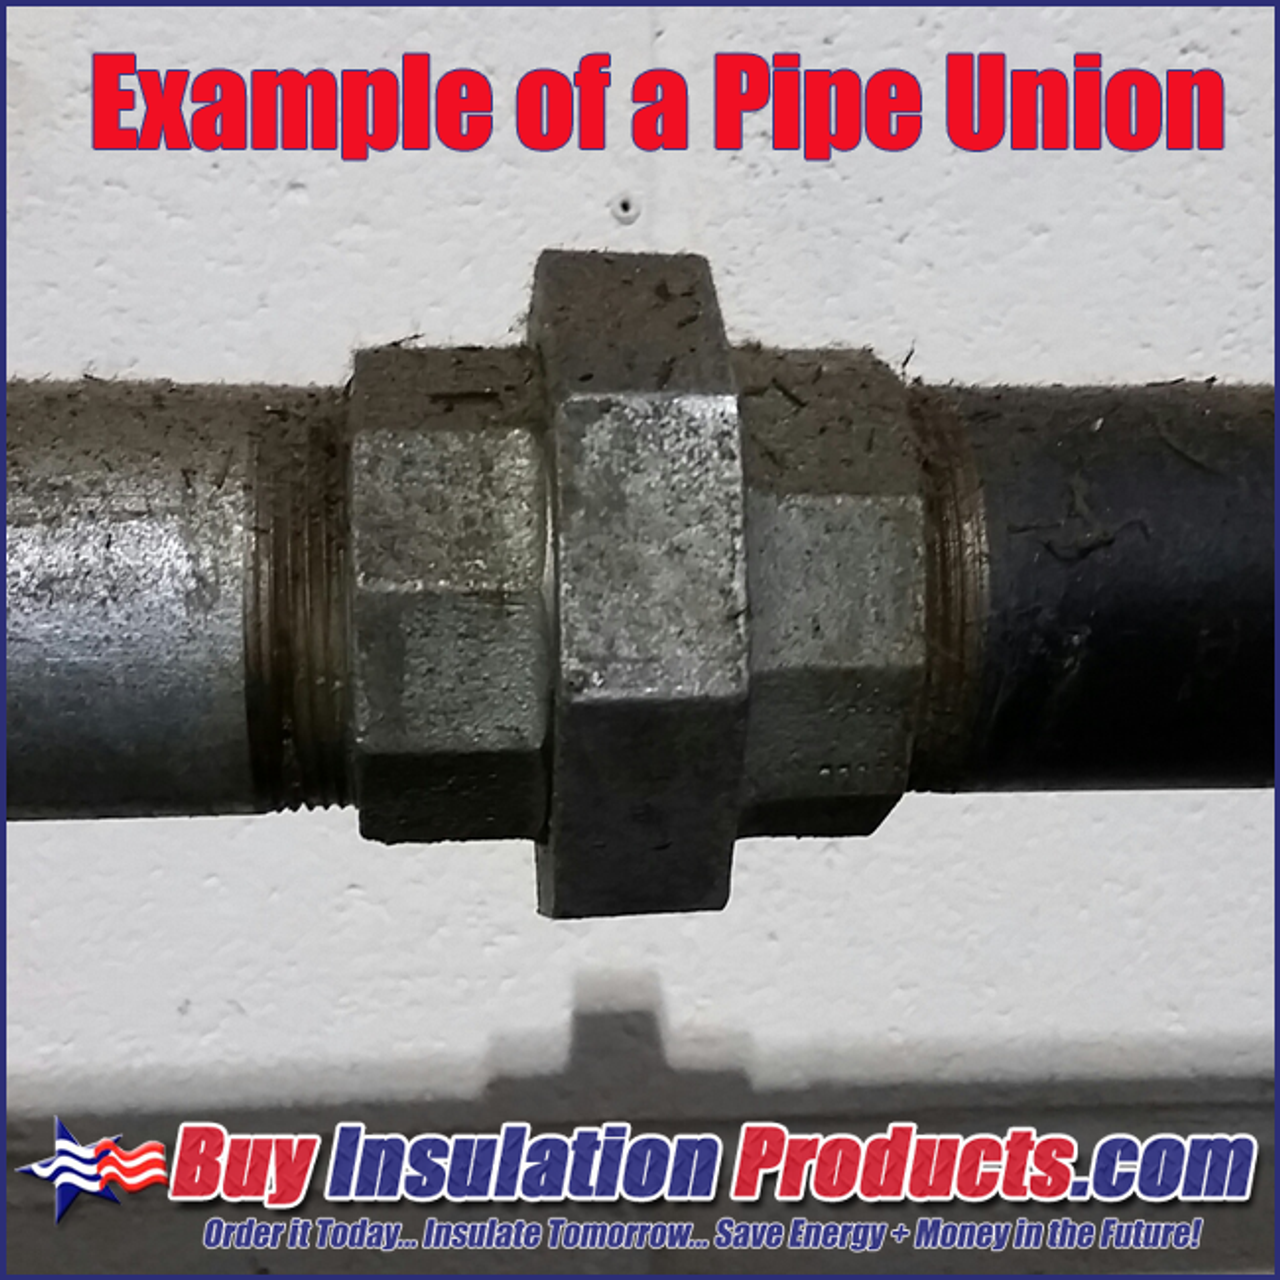 How to Install PVC Union Fittings for Pipes and Insulation